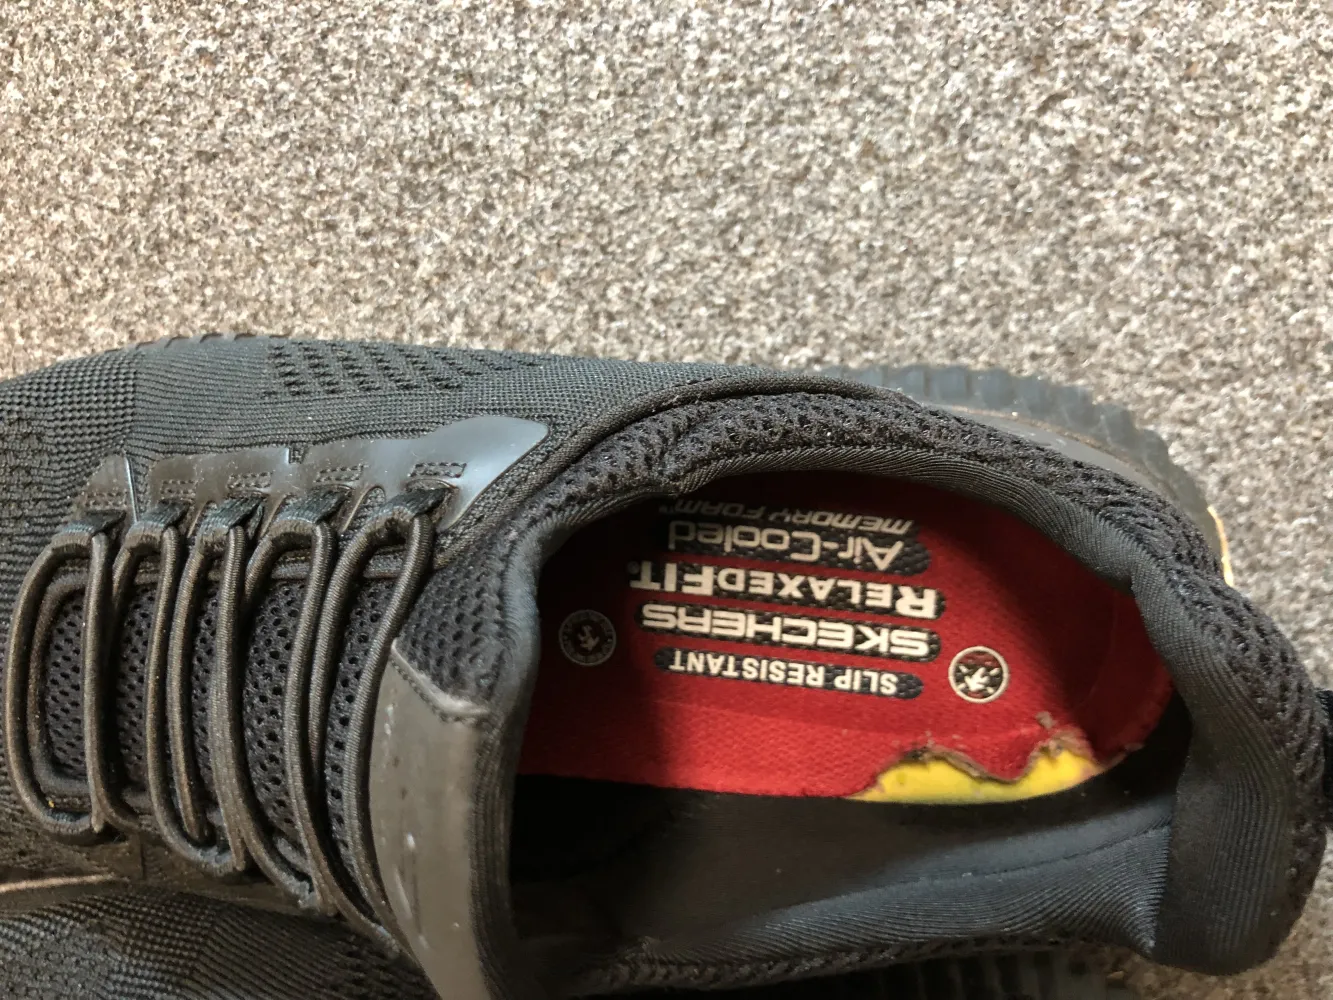 [Resolved] Skechers USA Review: Shoes fall apart - ComplaintsBoard.com